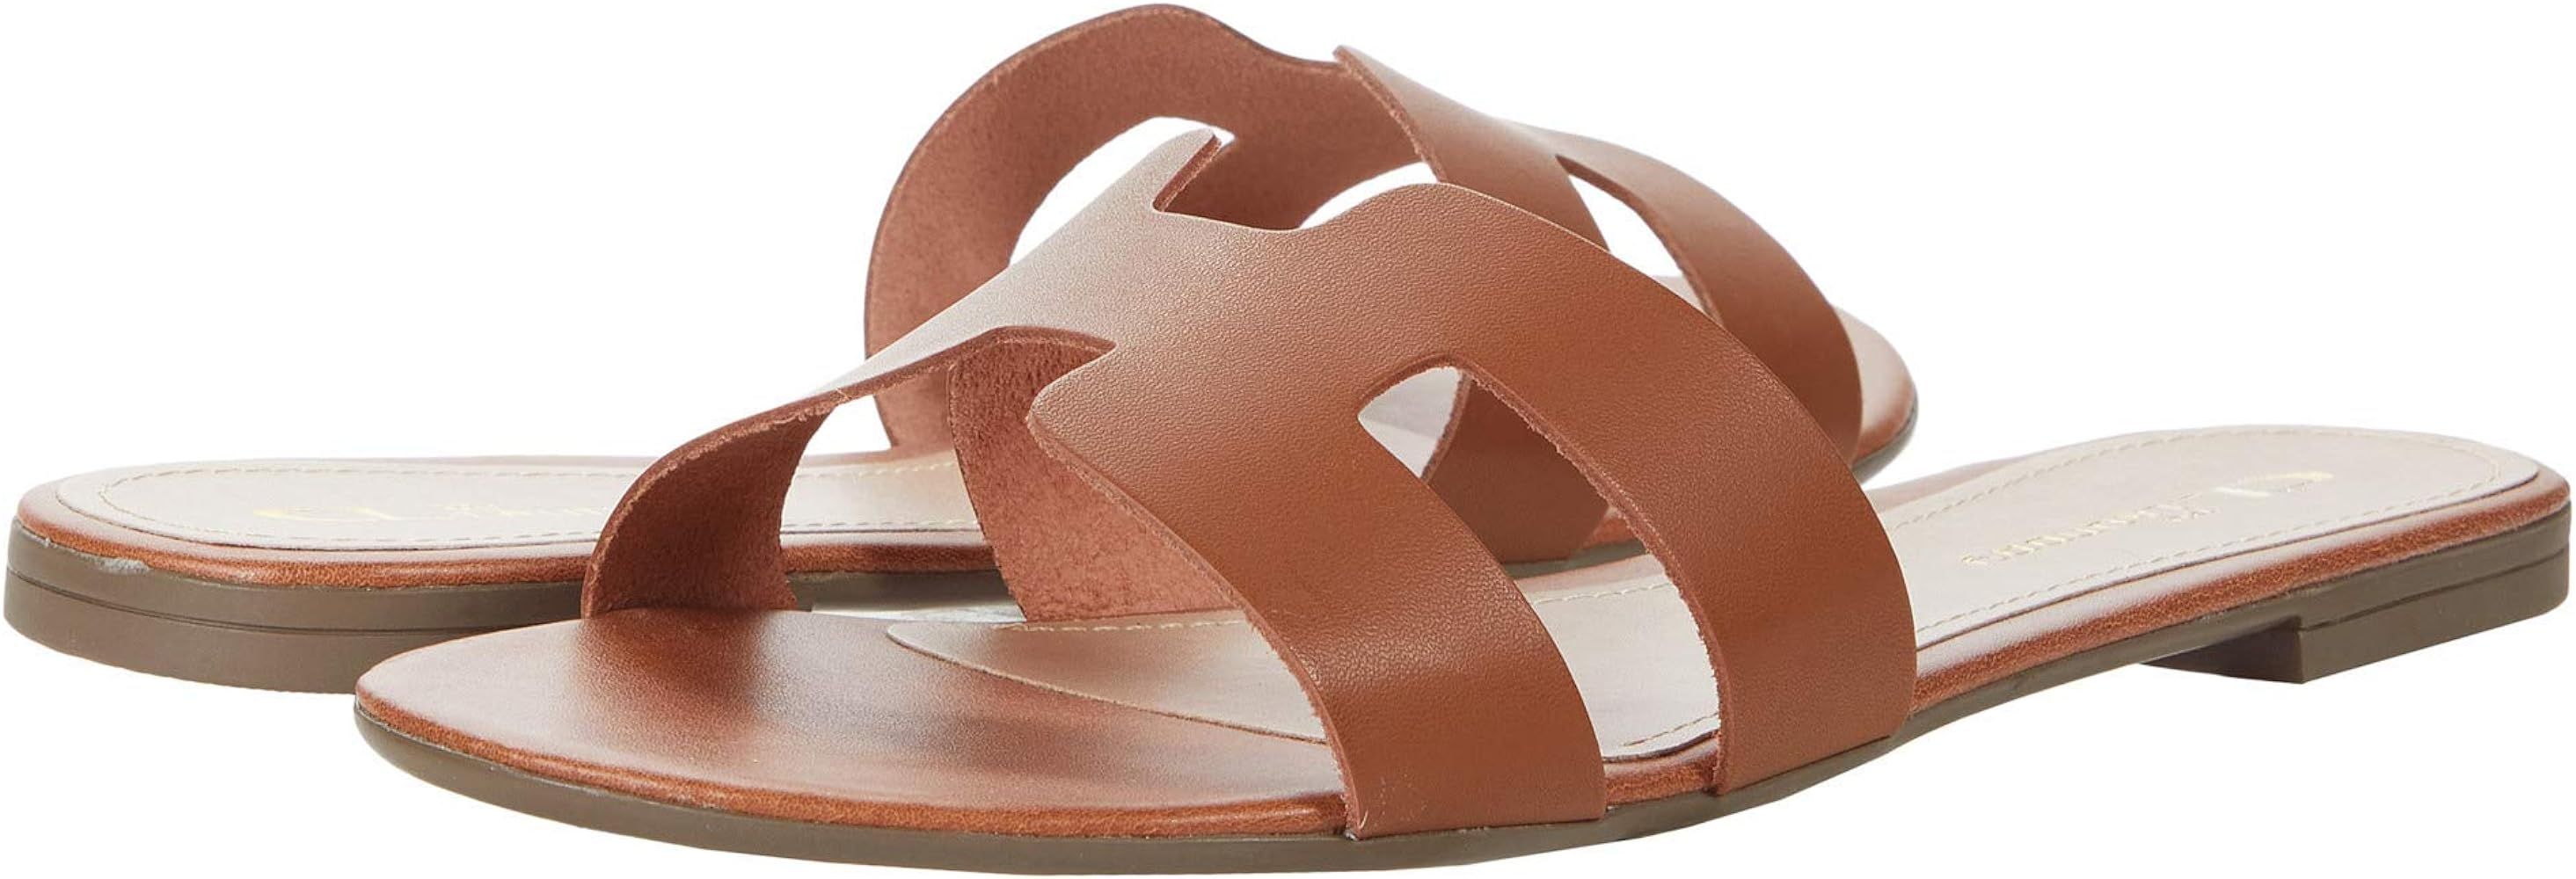 CL by Chinese Laundry womens Slide Sandal | Amazon (US)